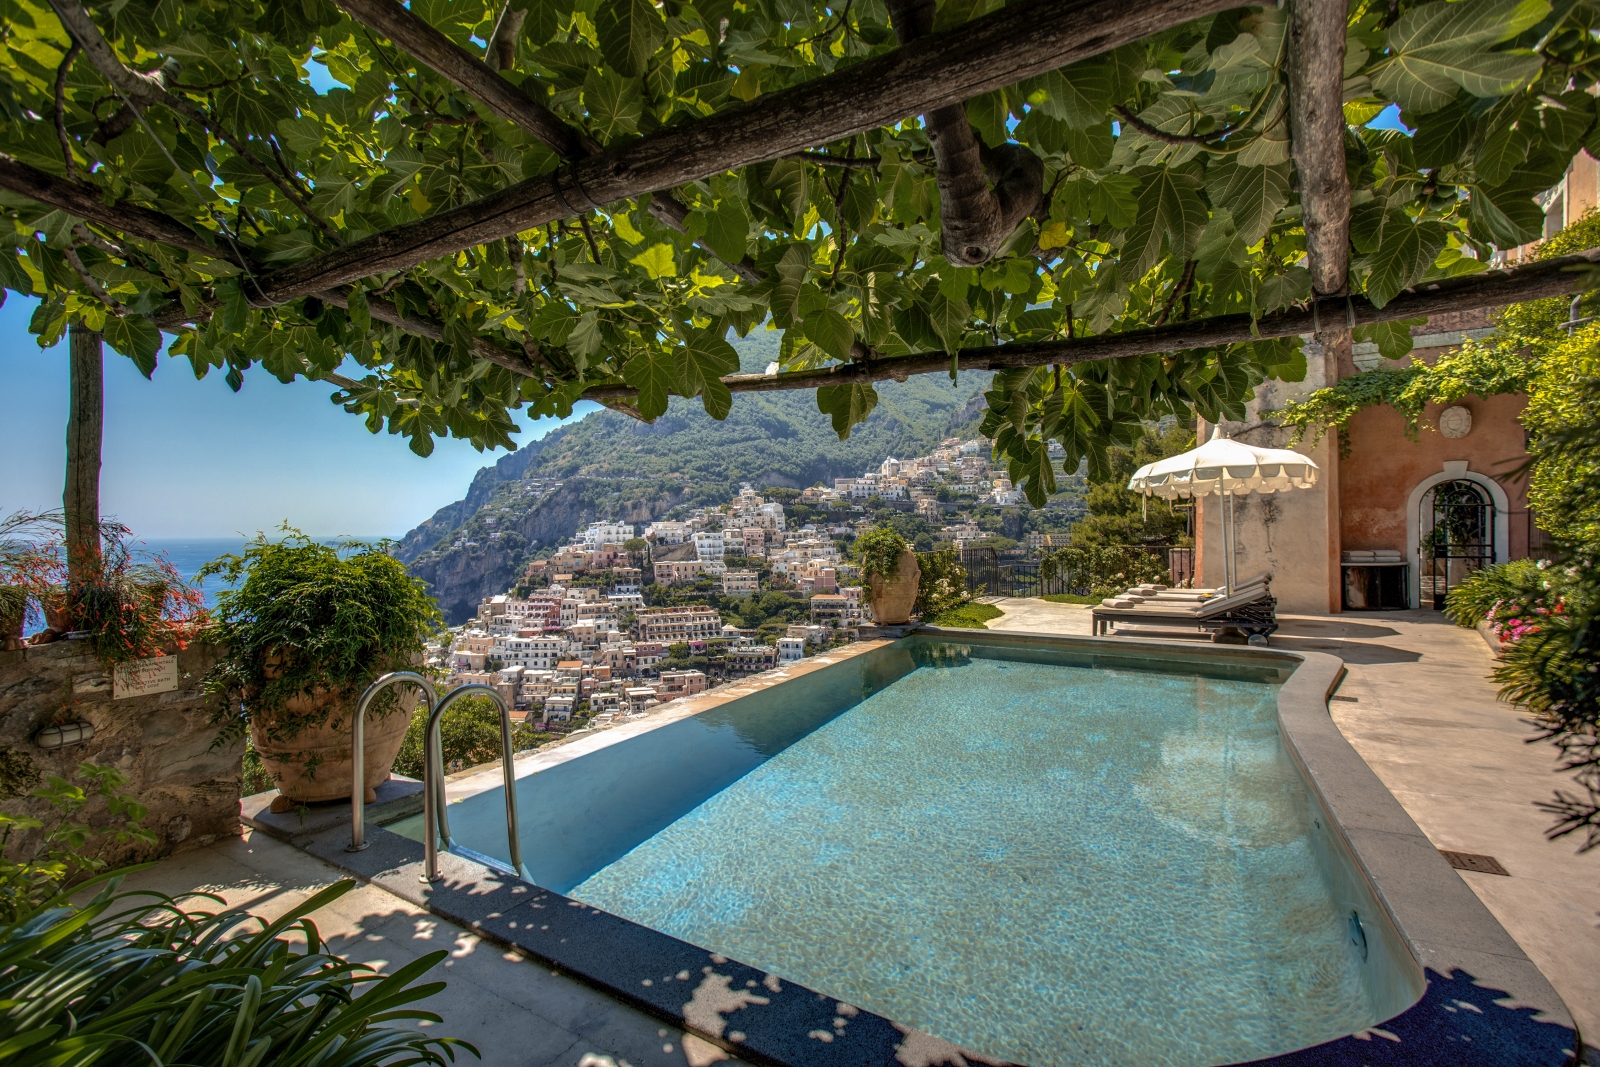 Pool with shaded seating and view towards Amalfi